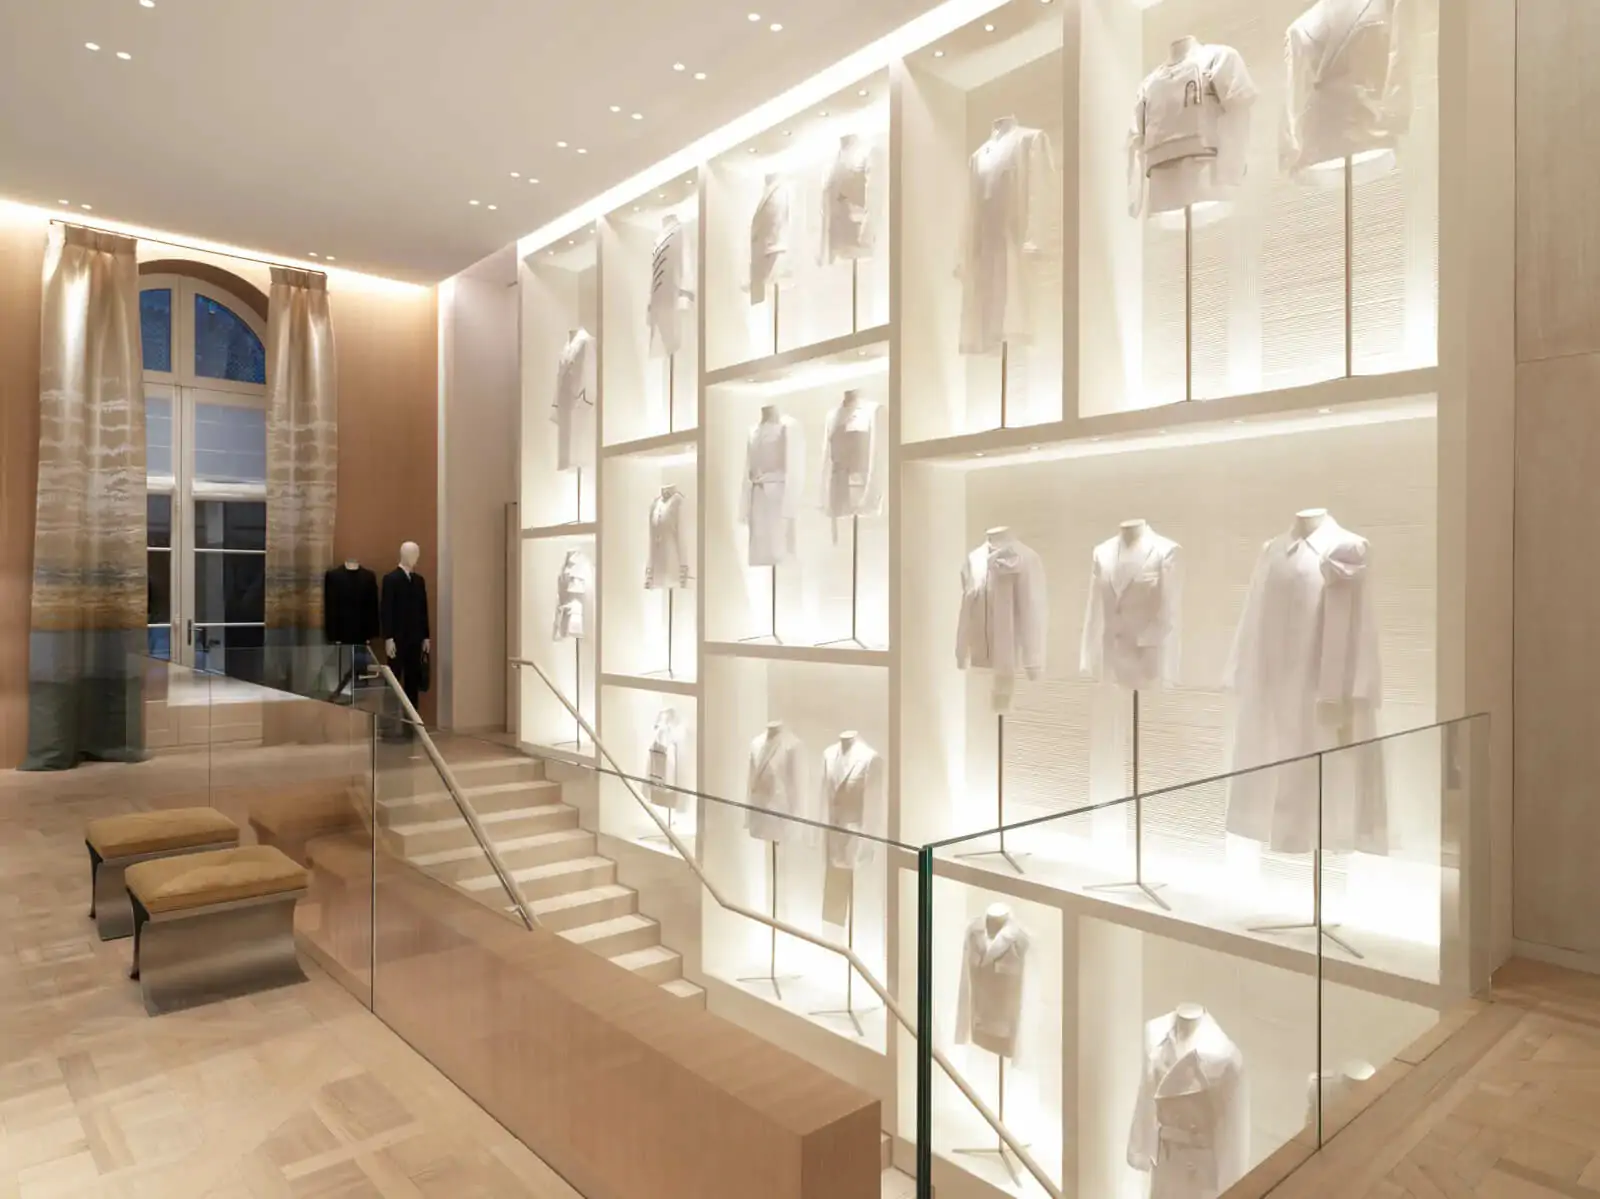 State of the art: Peter Marino's gallery inspired store for Louis